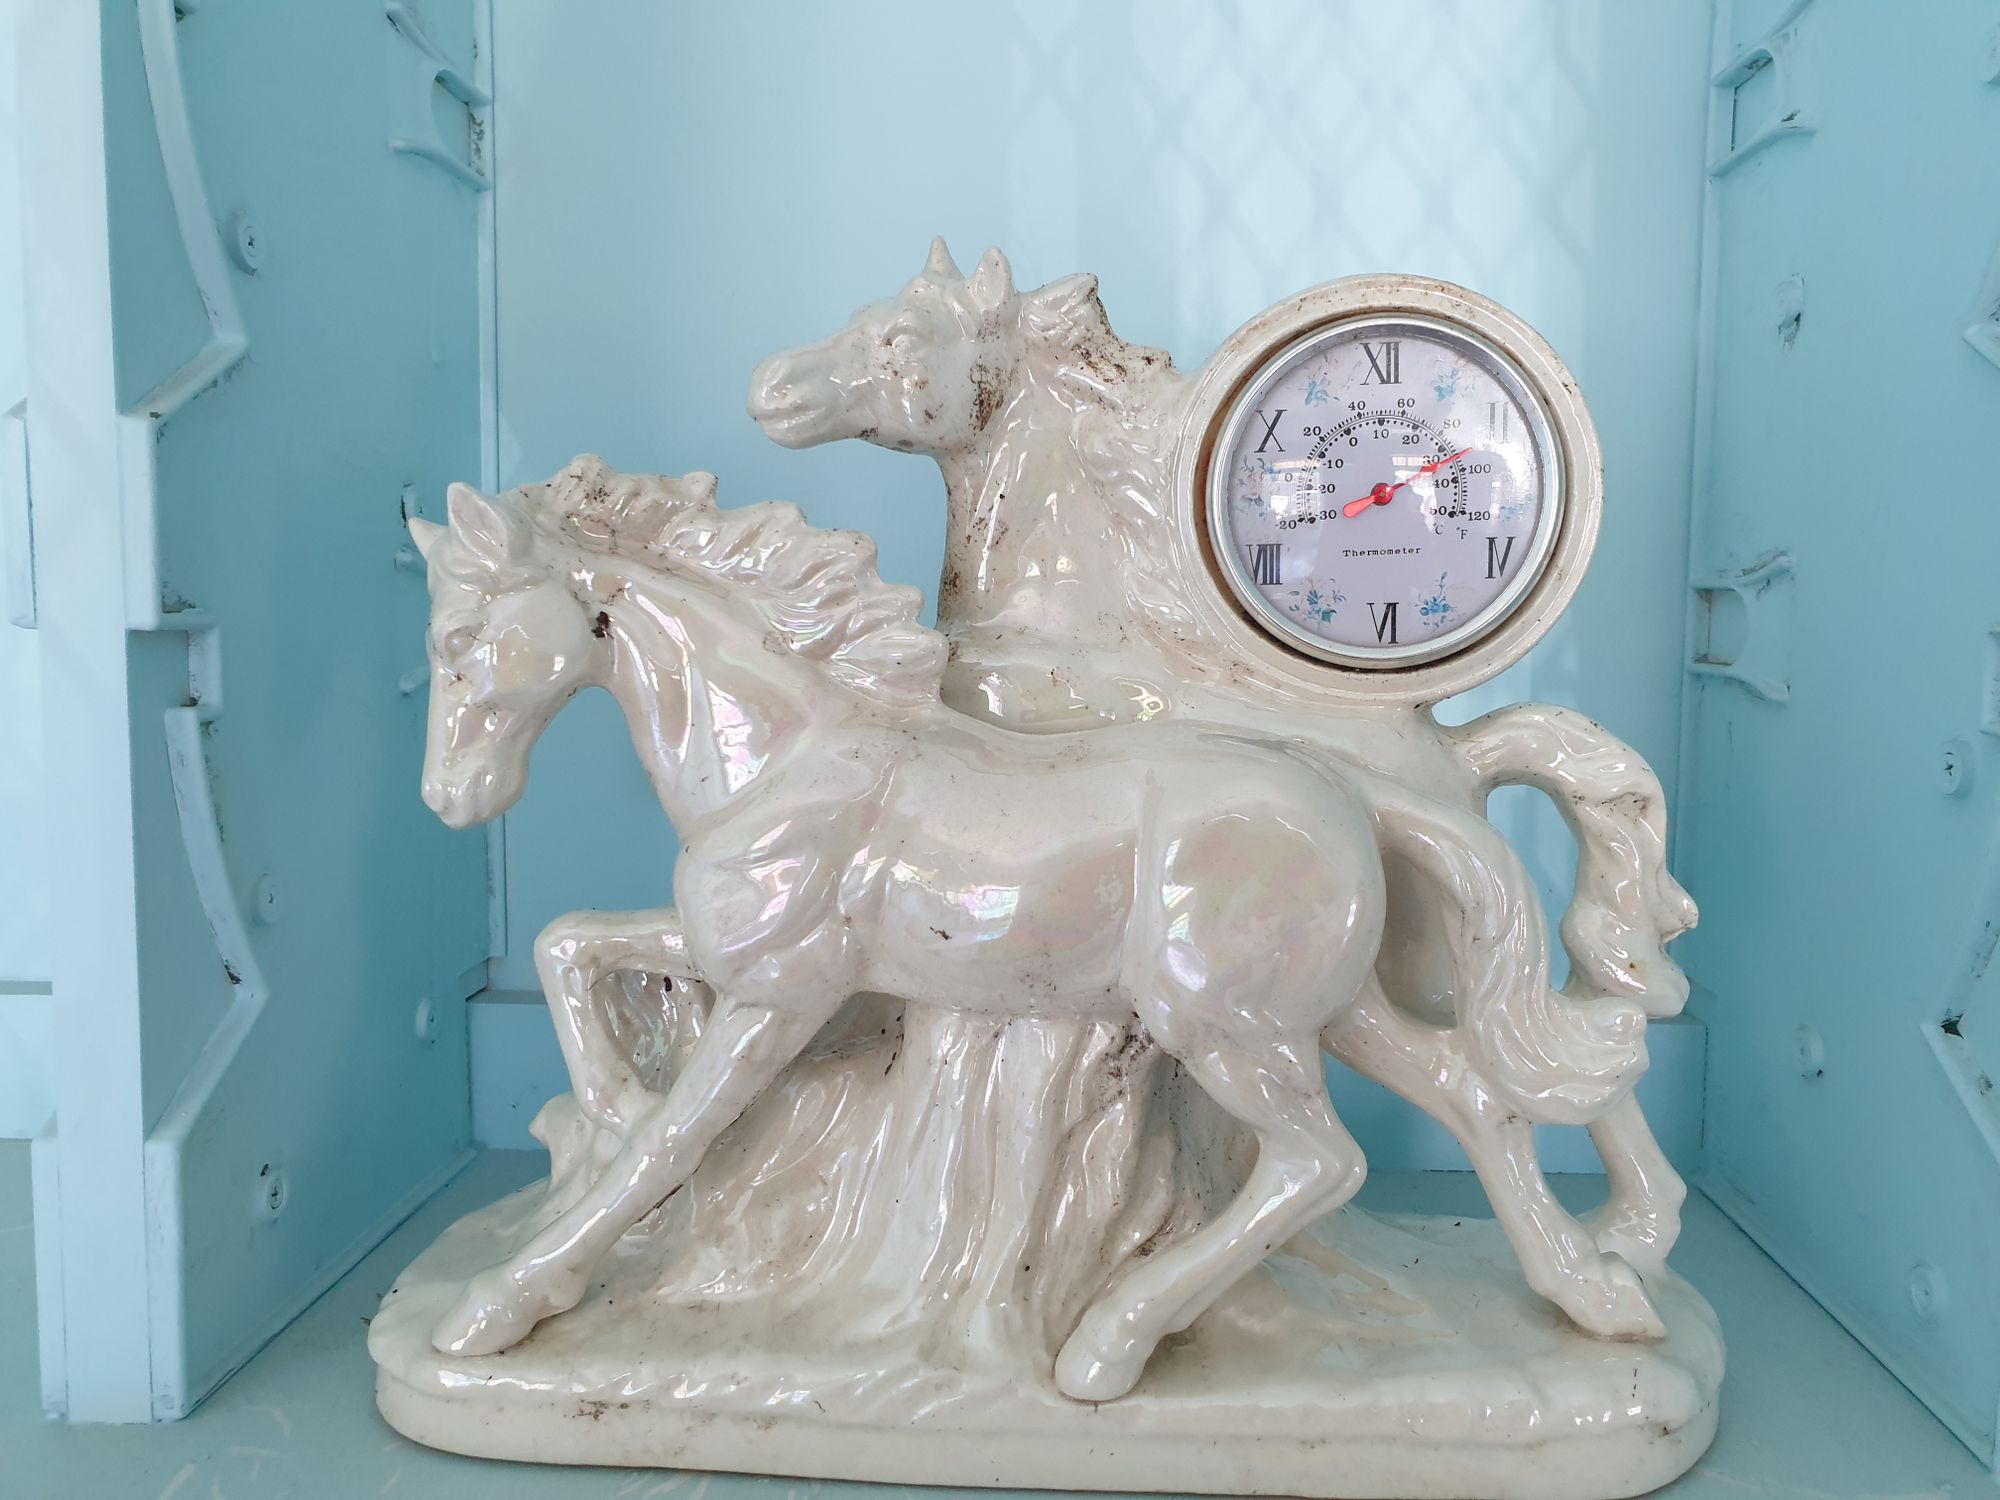 Ceramic horse figurine with a circular thermometer (working)